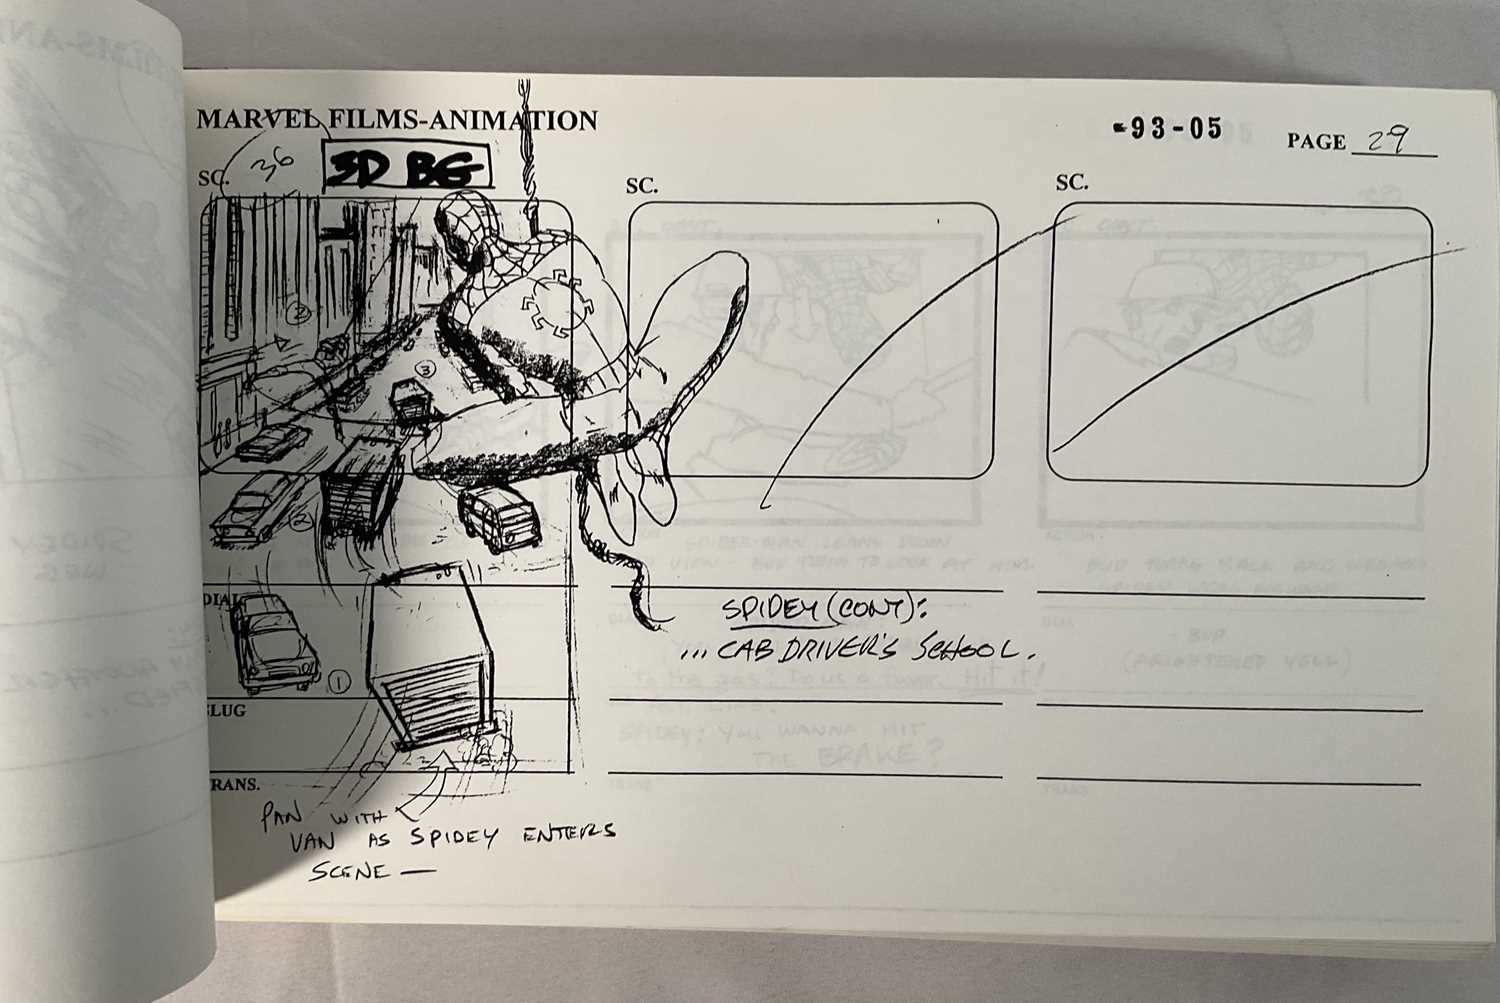 A folio of storyboards from the production of SPIDER-MAN the animated series, signed and stamped - Image 7 of 9